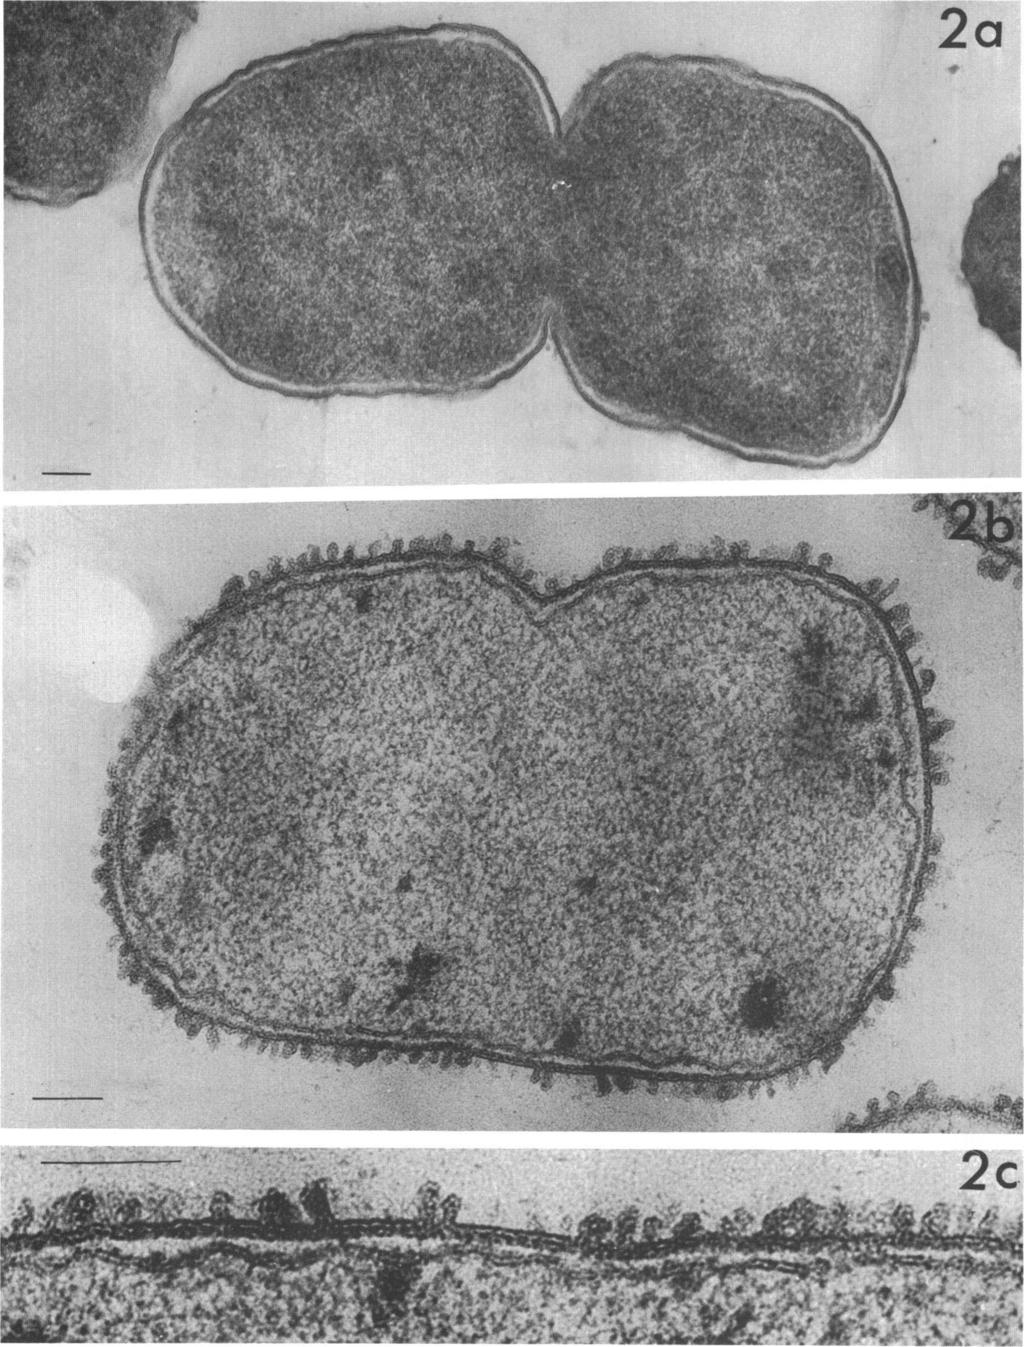 450 NOTES J. BACTERIOL. A.....'. Downloaded from http://jb.asm.org/ on September 16, 2018 by guest FIG. 2. Thin sections of E. coli B. (a) Untreated cell. X 63,000.